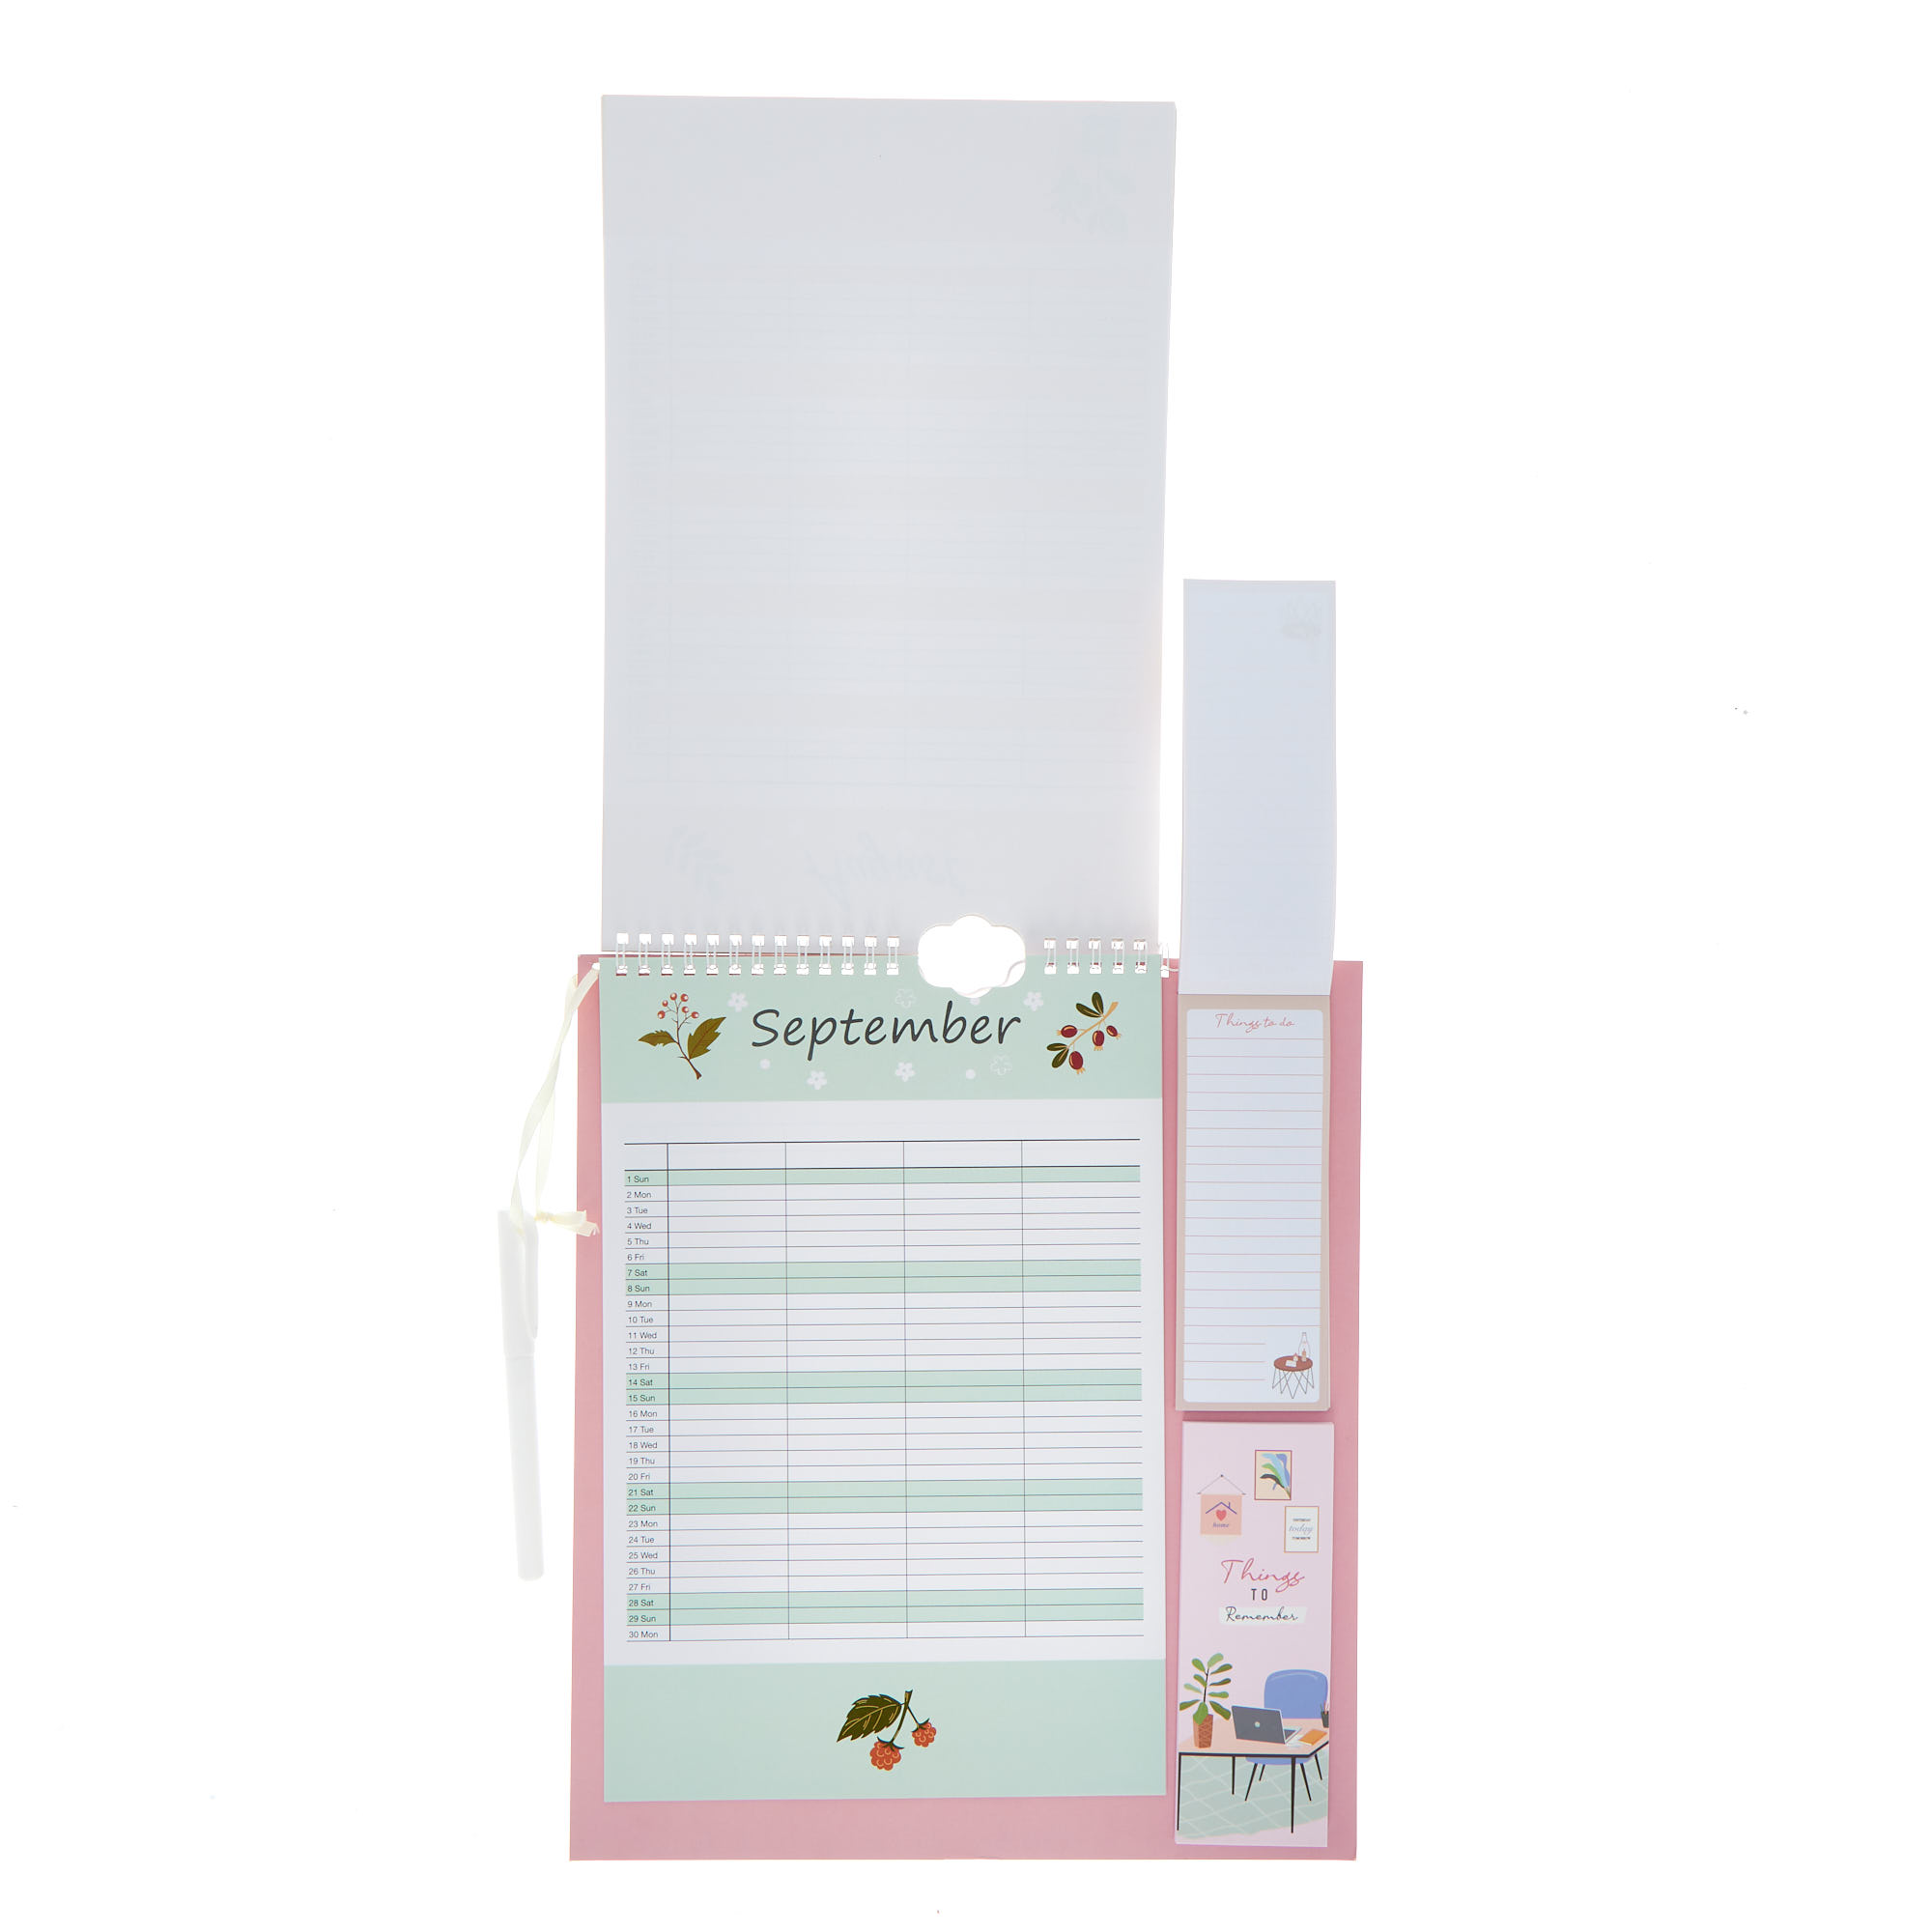 Buy Sort Your Life Out 2024 Family Organiser for GBP 2.99